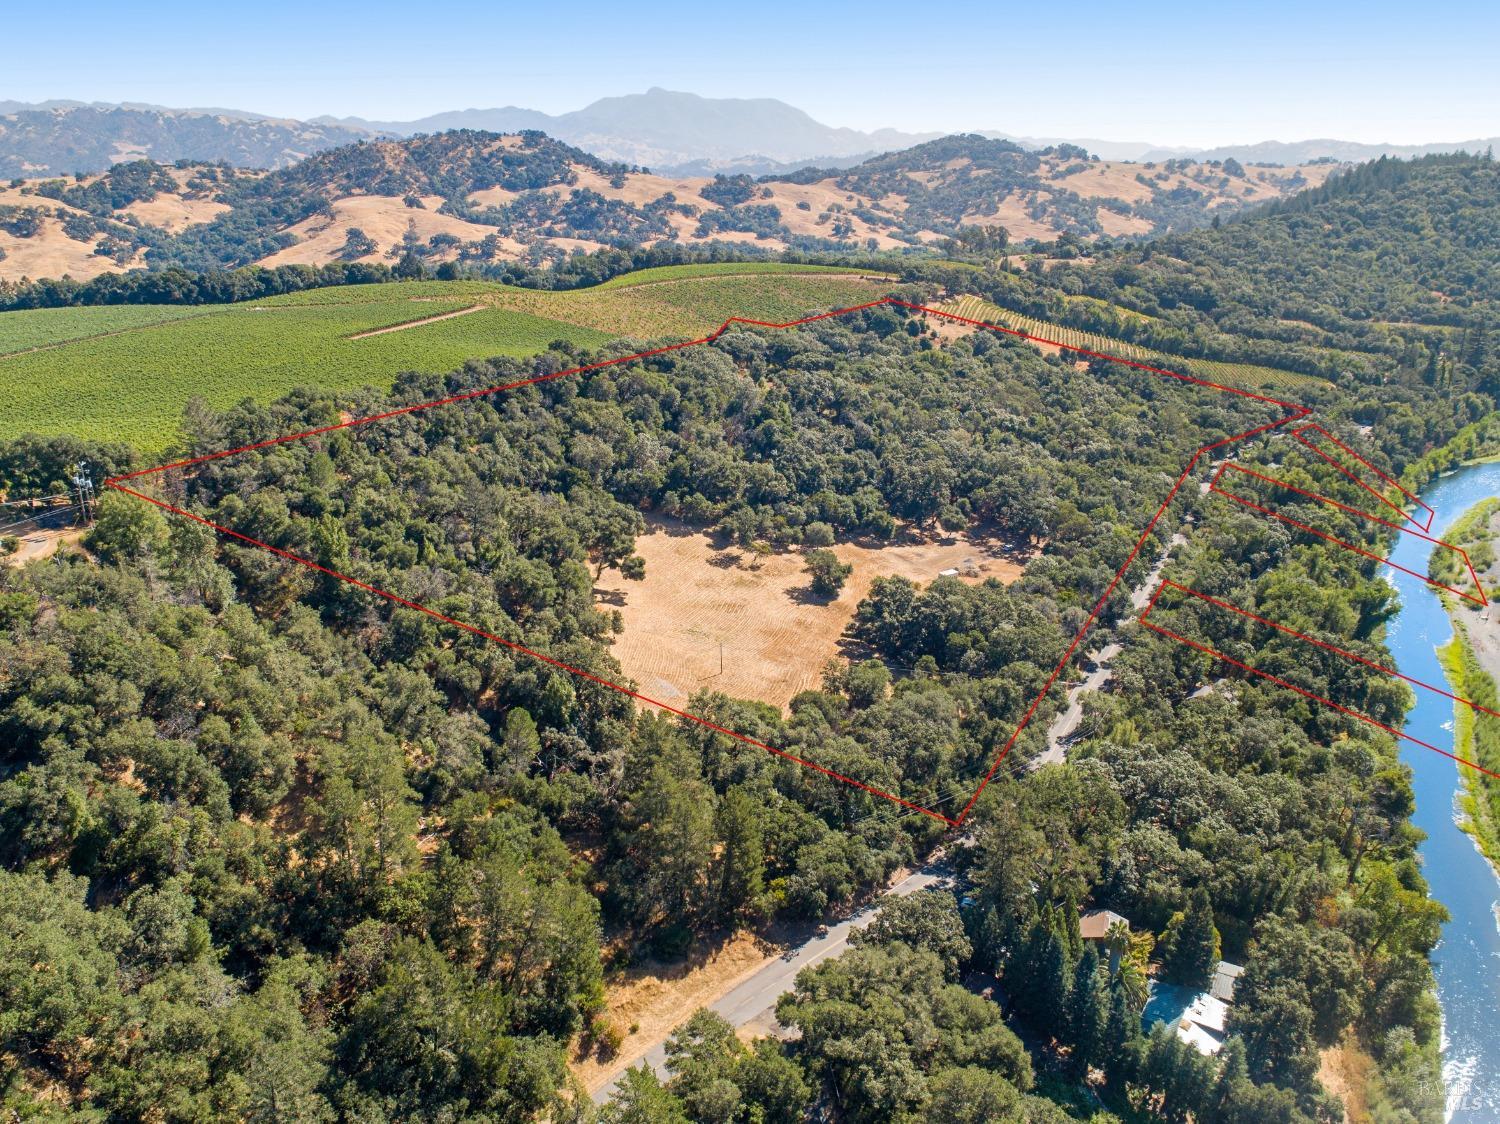 Fabulous home site with commanding views of the Russian River valley and Fitch Mountain. Build your dream home on 25 +/- acres. Includes ownership of three parcels that are points of access to the Russian River. Secluded end of the road privacy. Smooth County paved road to the site. Paved driveway to the main homesite. Open meadows and Oak woodlands. Great southern exposure for solar and a new 14GPM well. Room for hobby vineyard, and additional homesites. Adjacent to world class premium (Silver Oak) vineyards. Less than four miles, Six minutes to the Healdsburg Plaza.